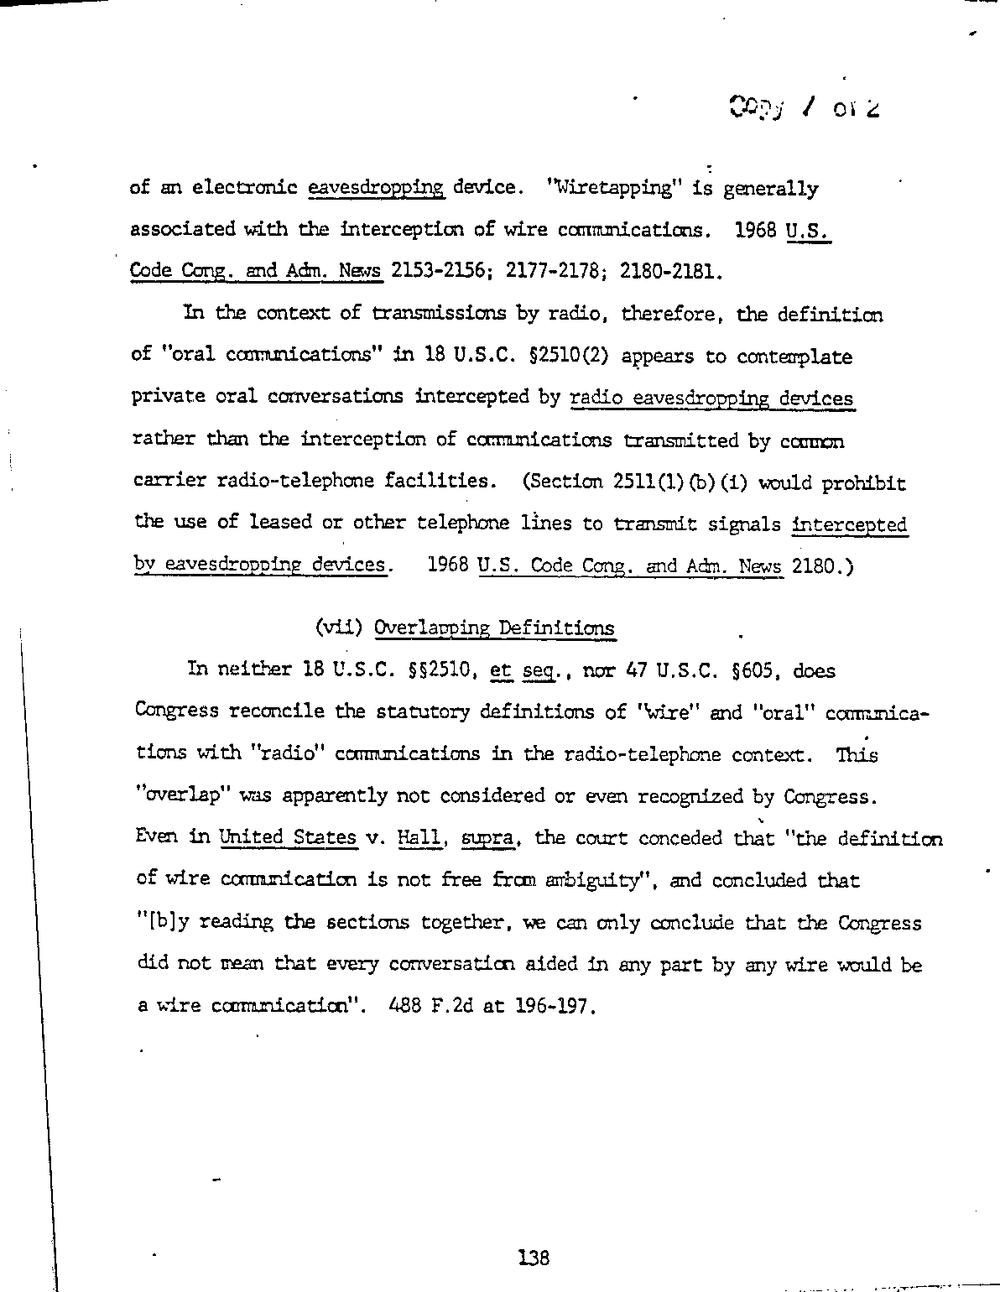 Page 146 from Report on Inquiry Into CIA Related Electronic Surveillance Activities